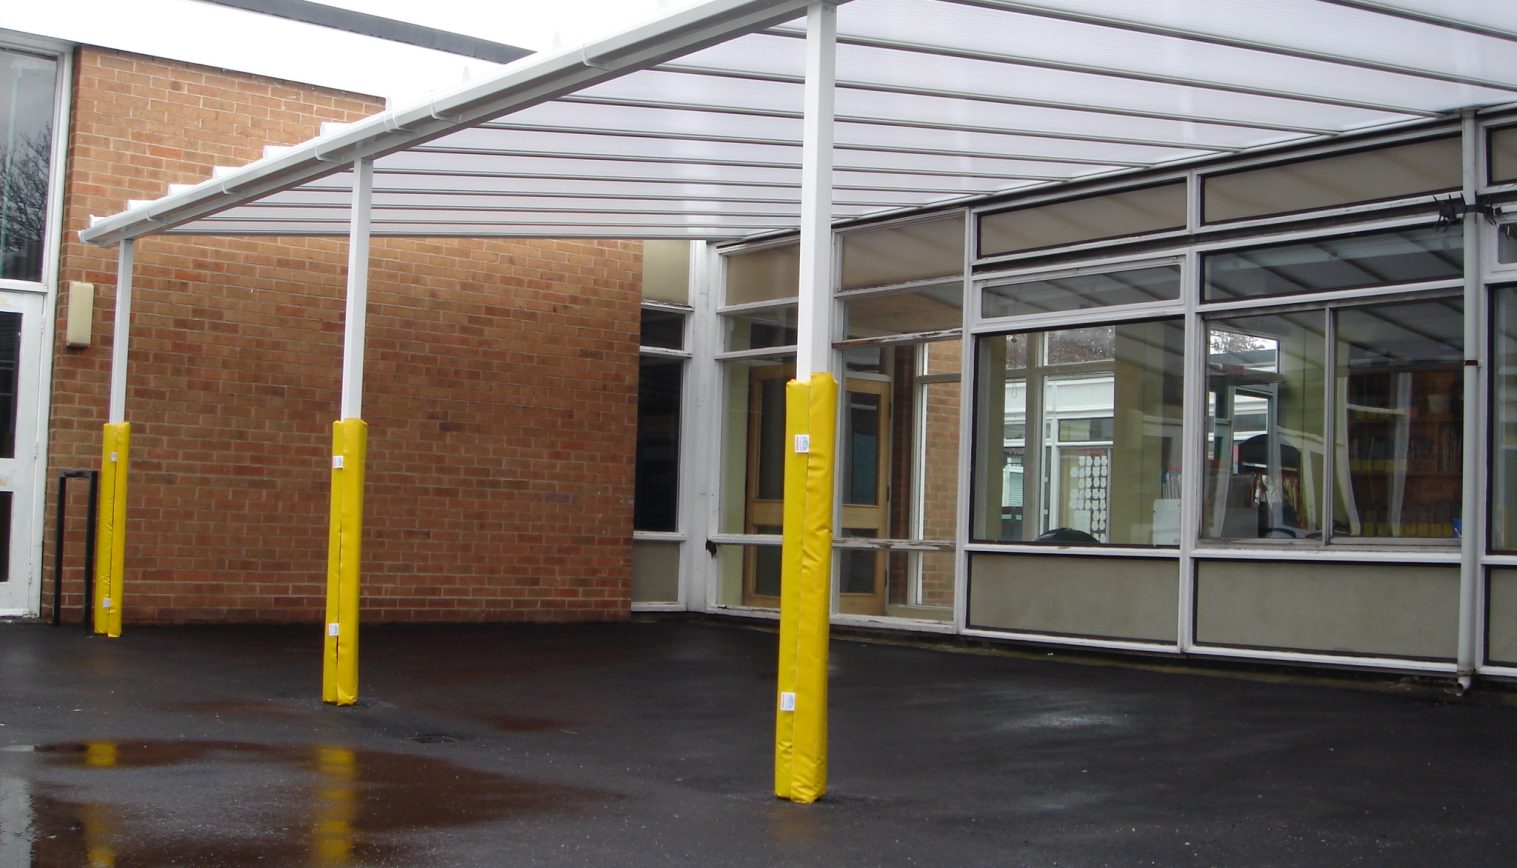 Mellor Community Primary School – Wall Mounted Canopy